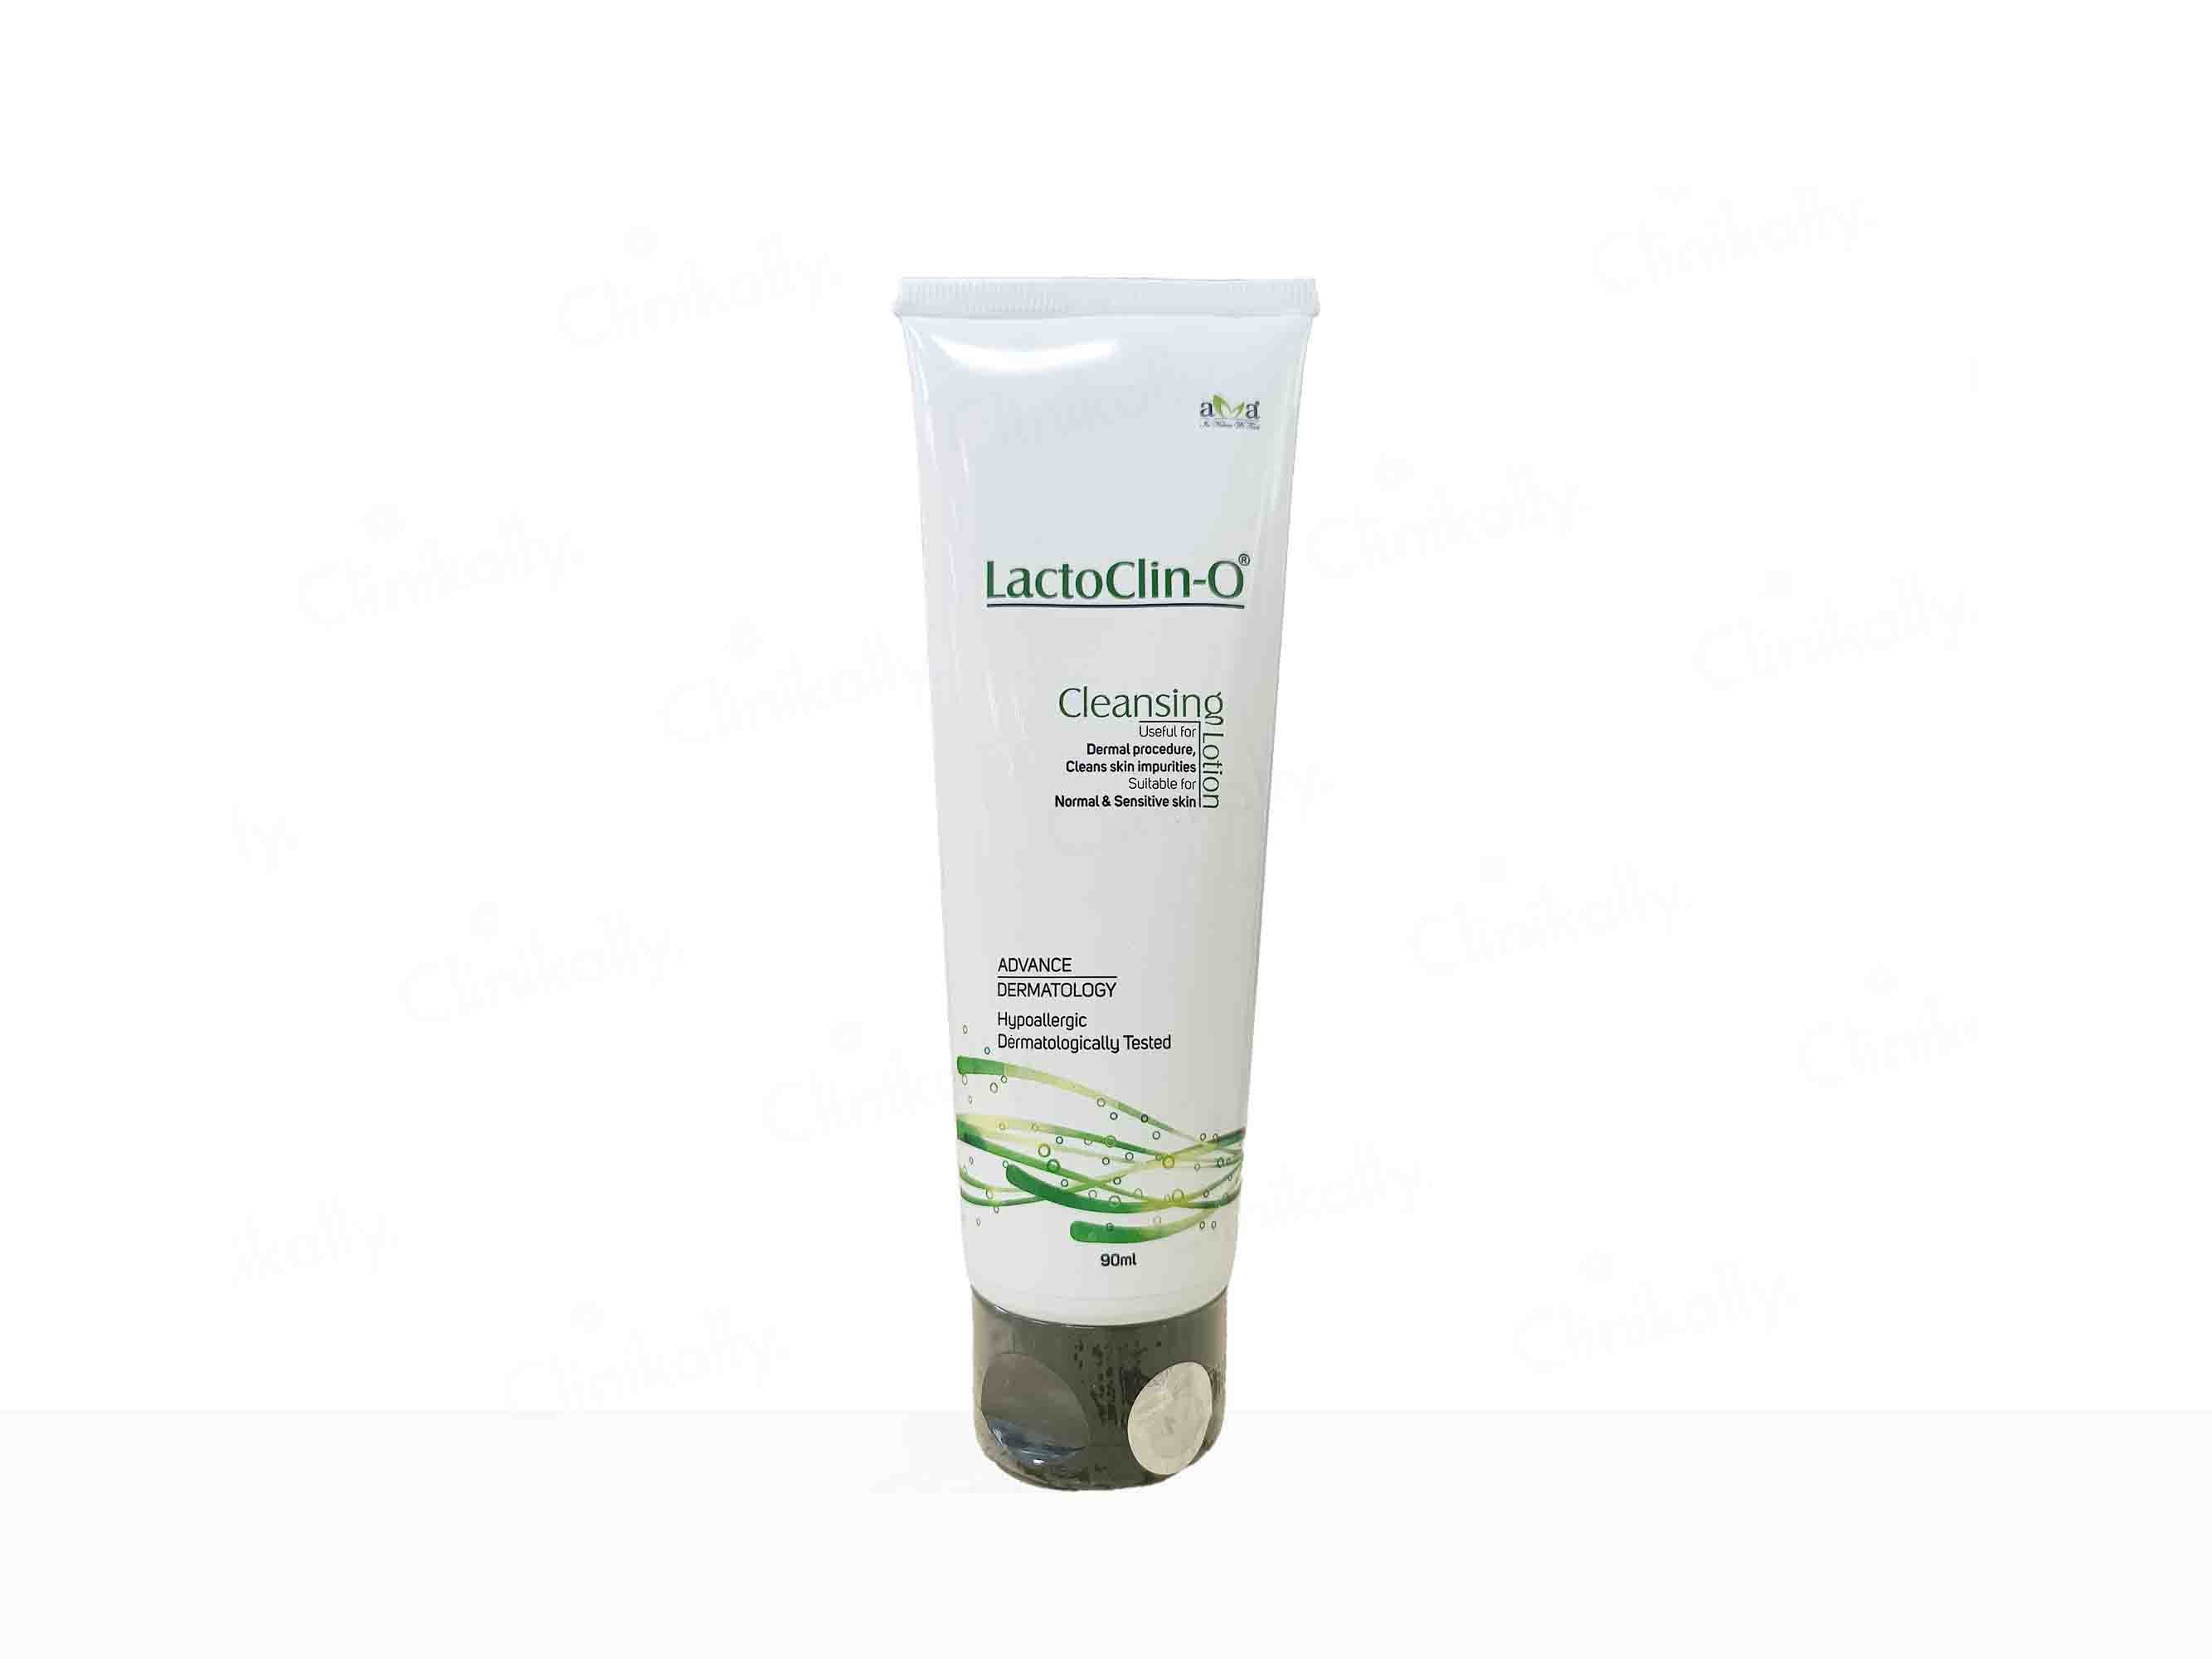 Vegetal LactoClin-O Cleansing Lotion